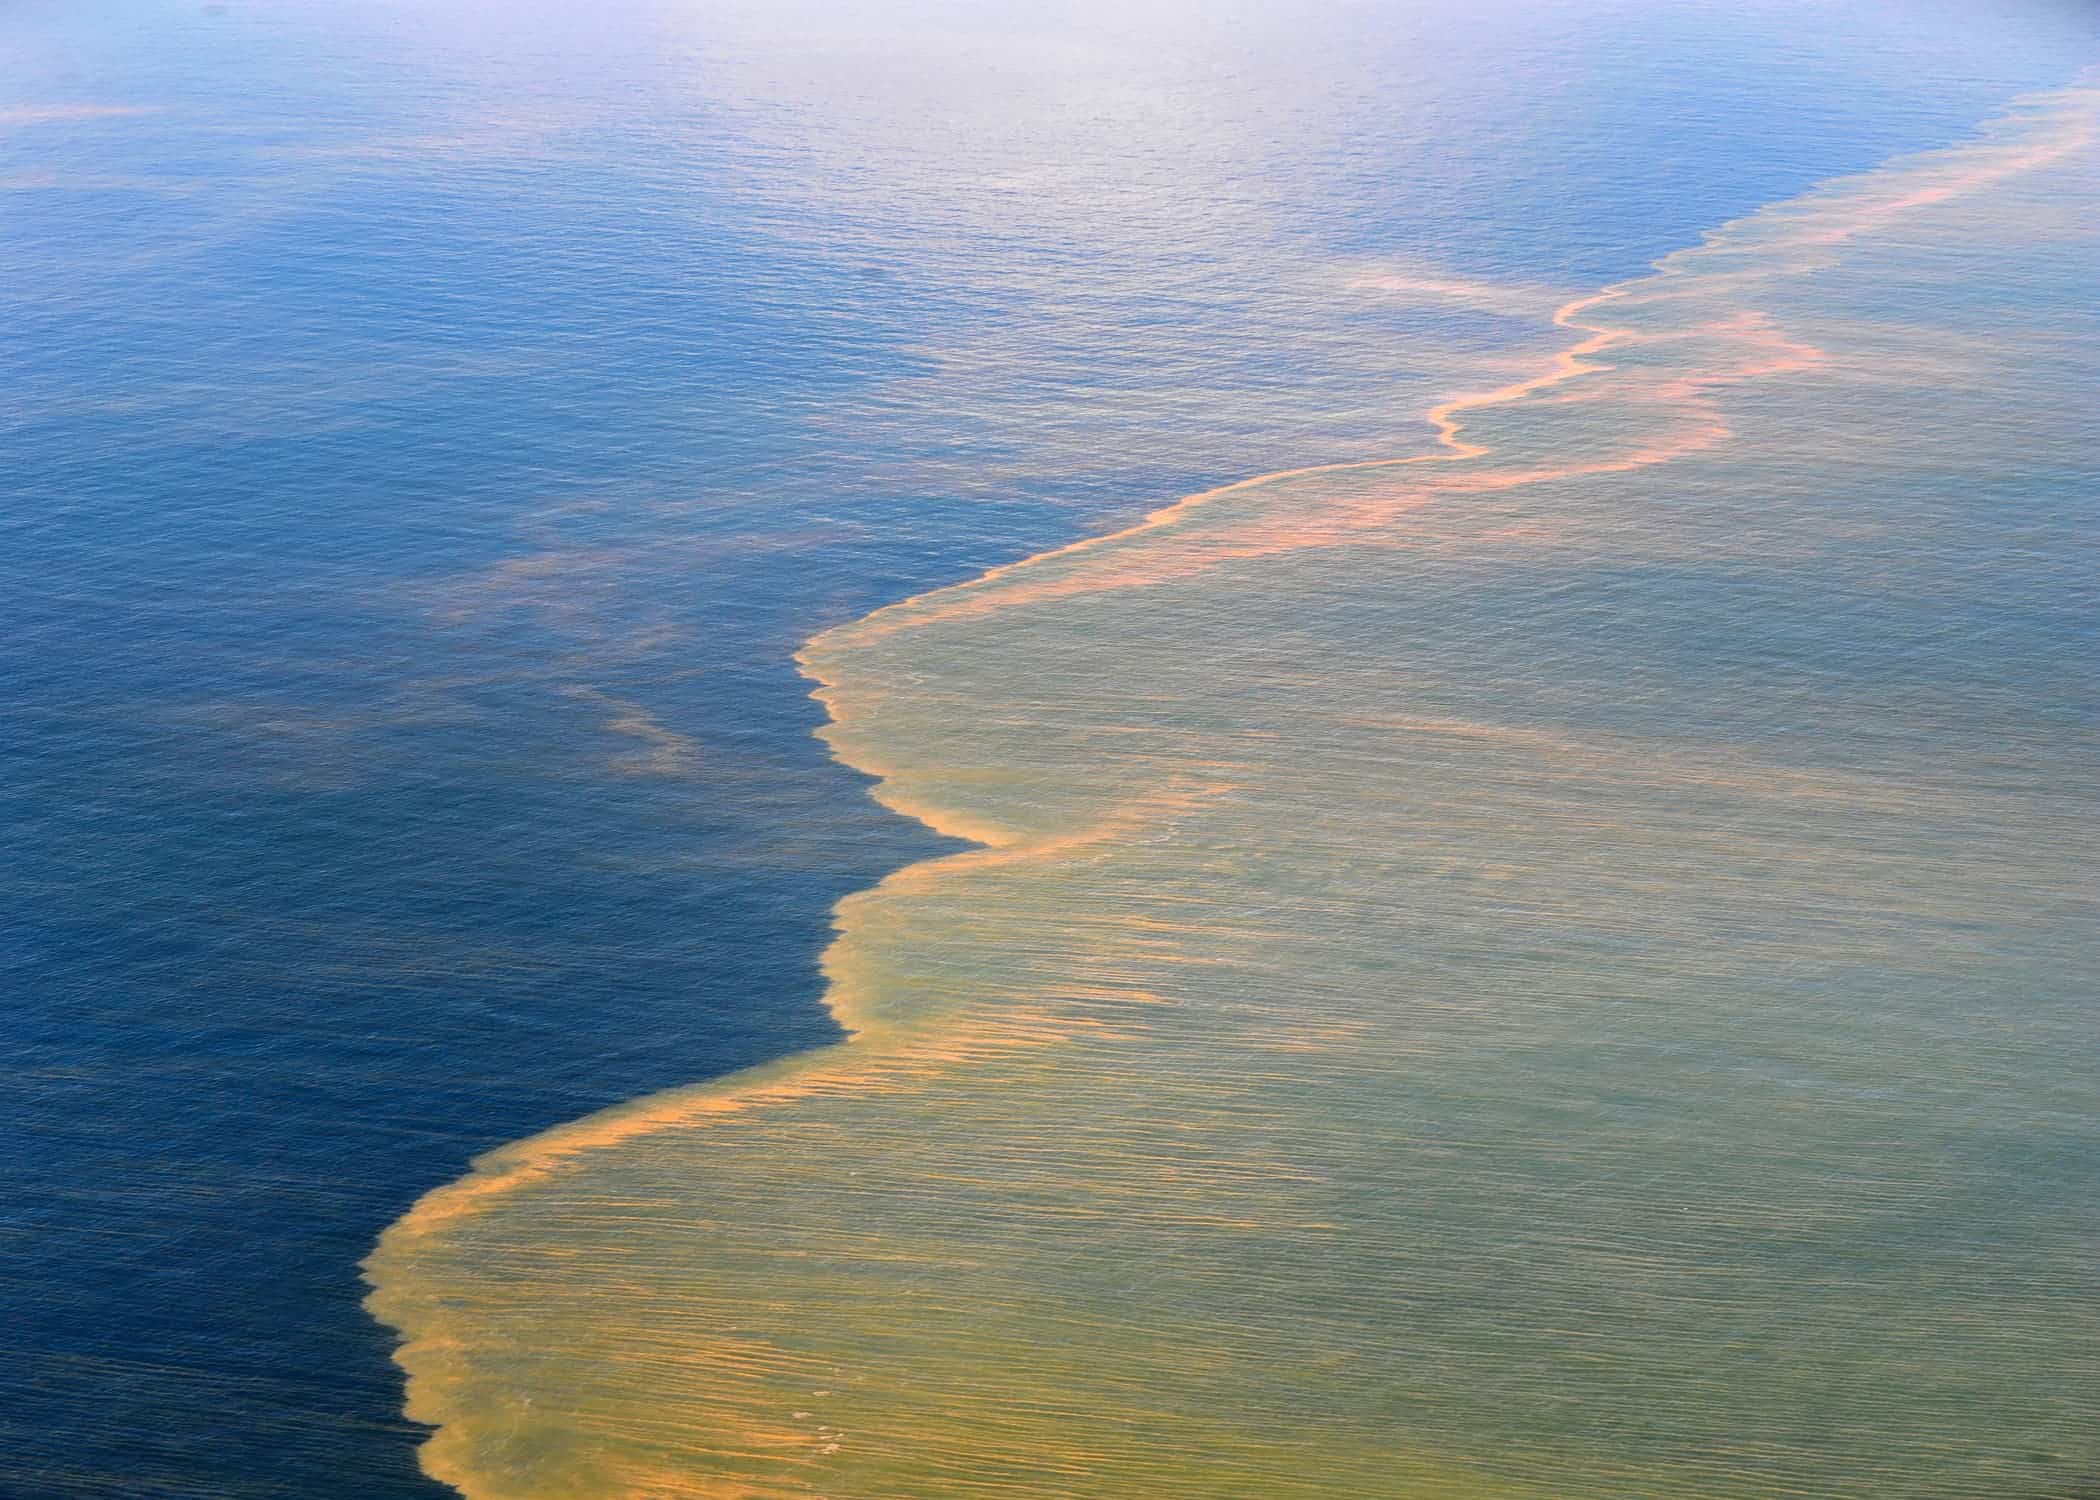 Oil from the Deepwater Horizon oil spill approaches the coast of Mobile, Alabama, May 6, 2010.